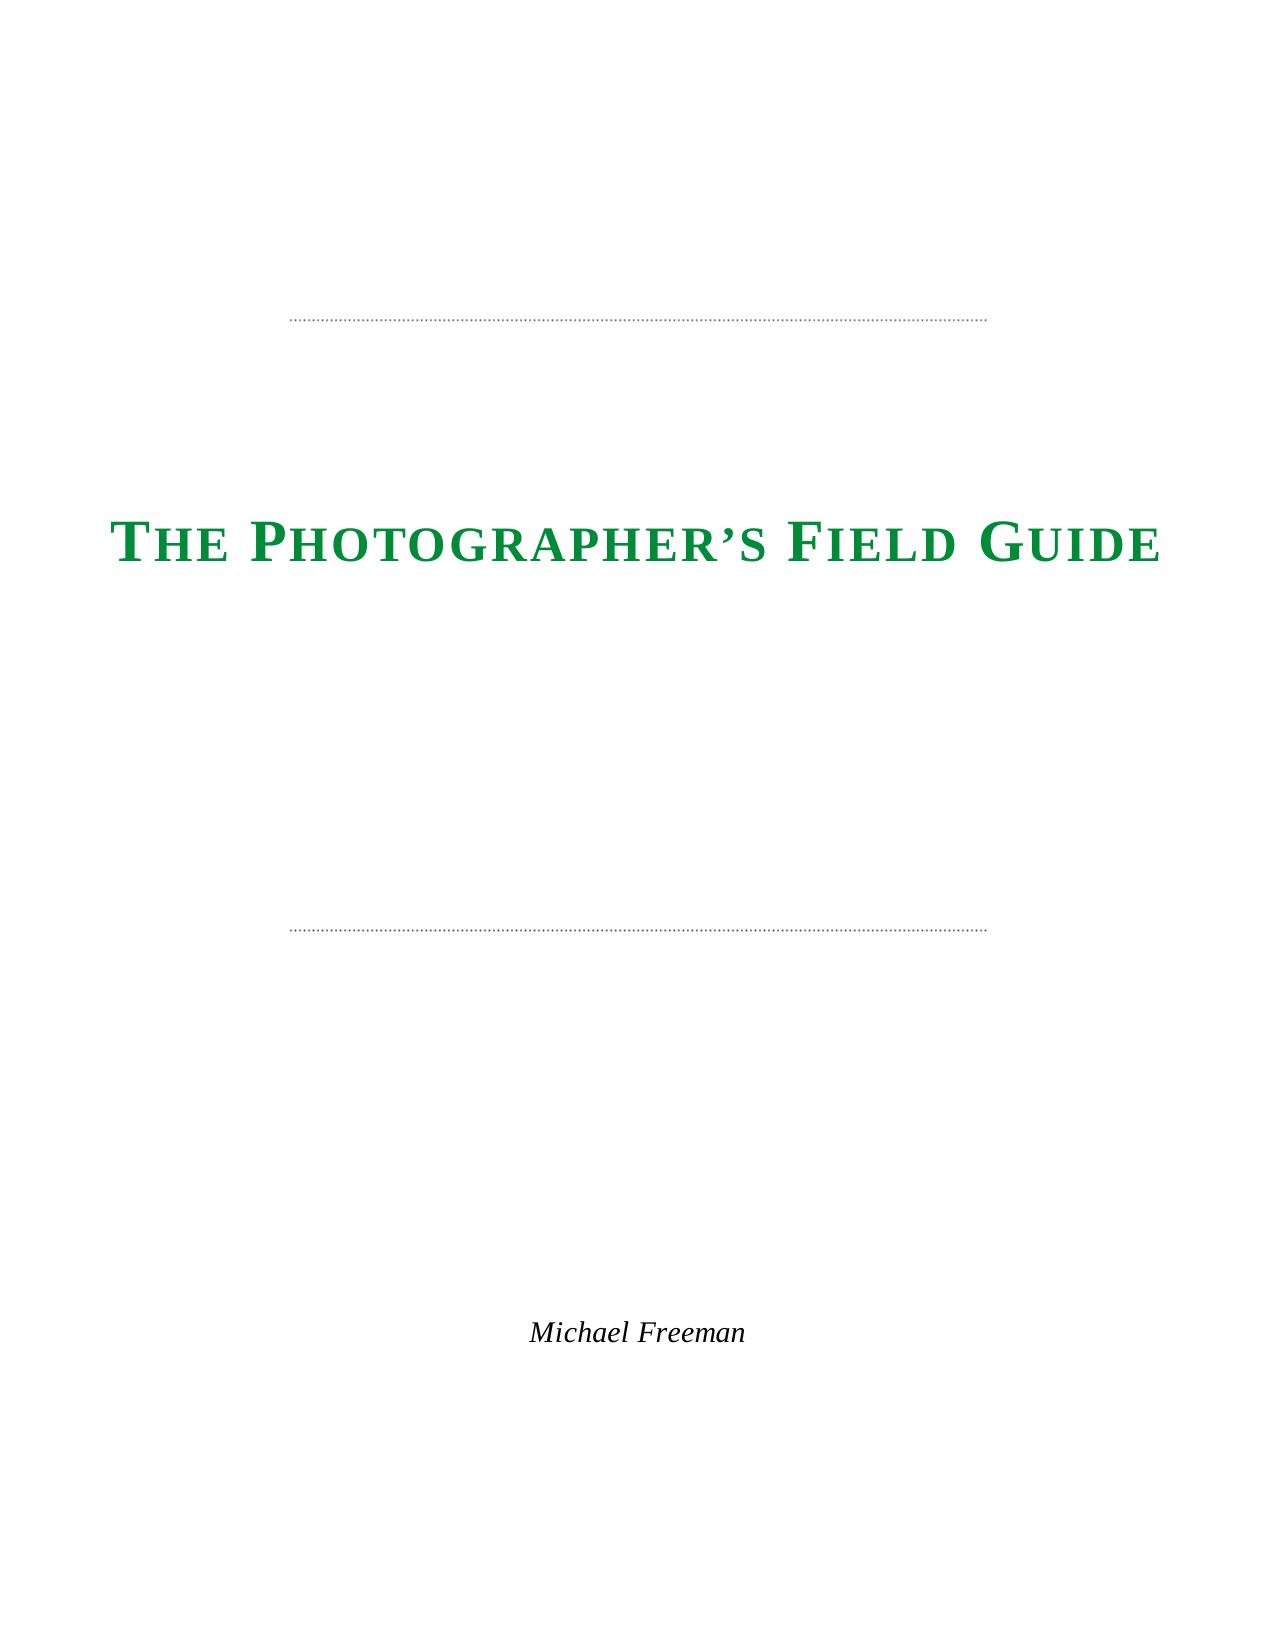 The Photographer's Field Guide by Michael Freeman